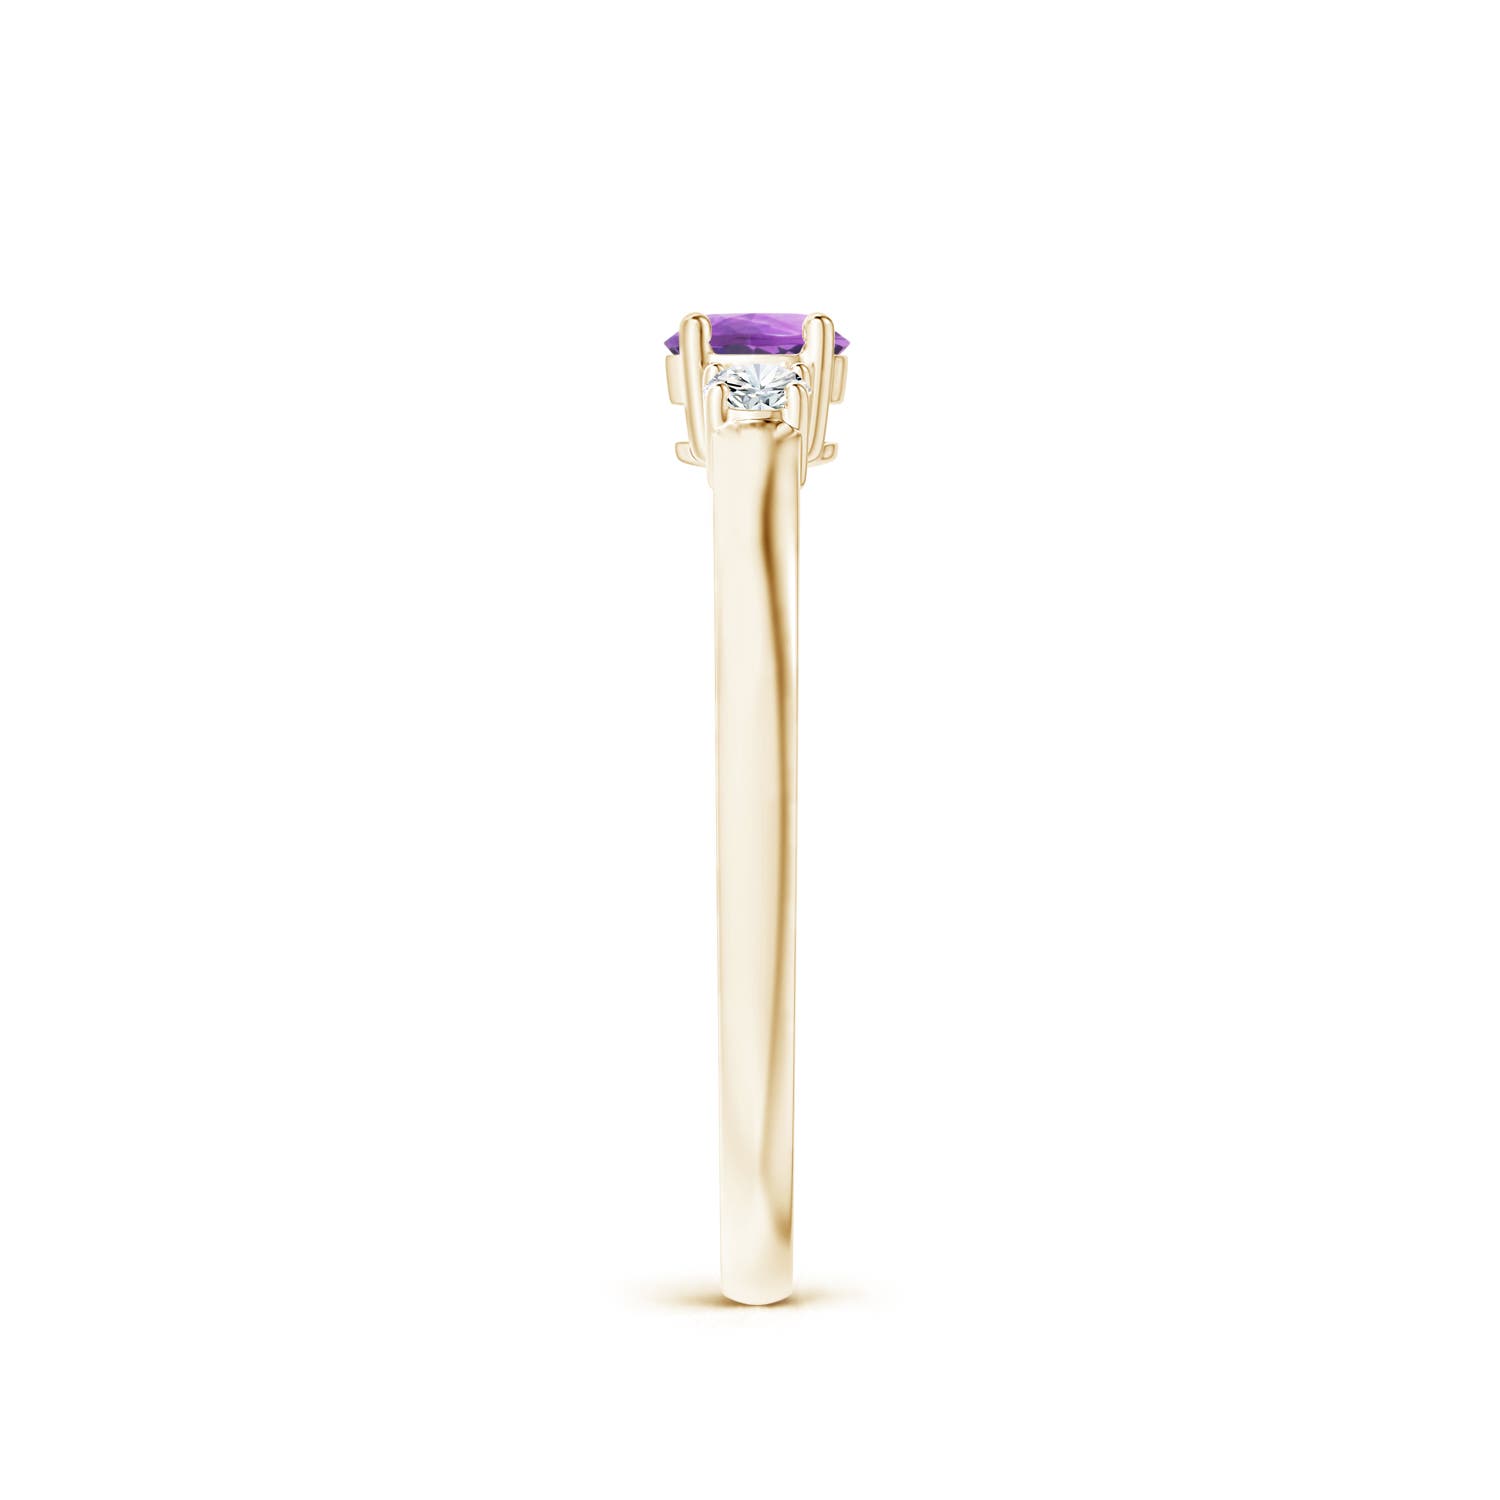 A - Amethyst / 0.39 CT / 14 KT Yellow Gold